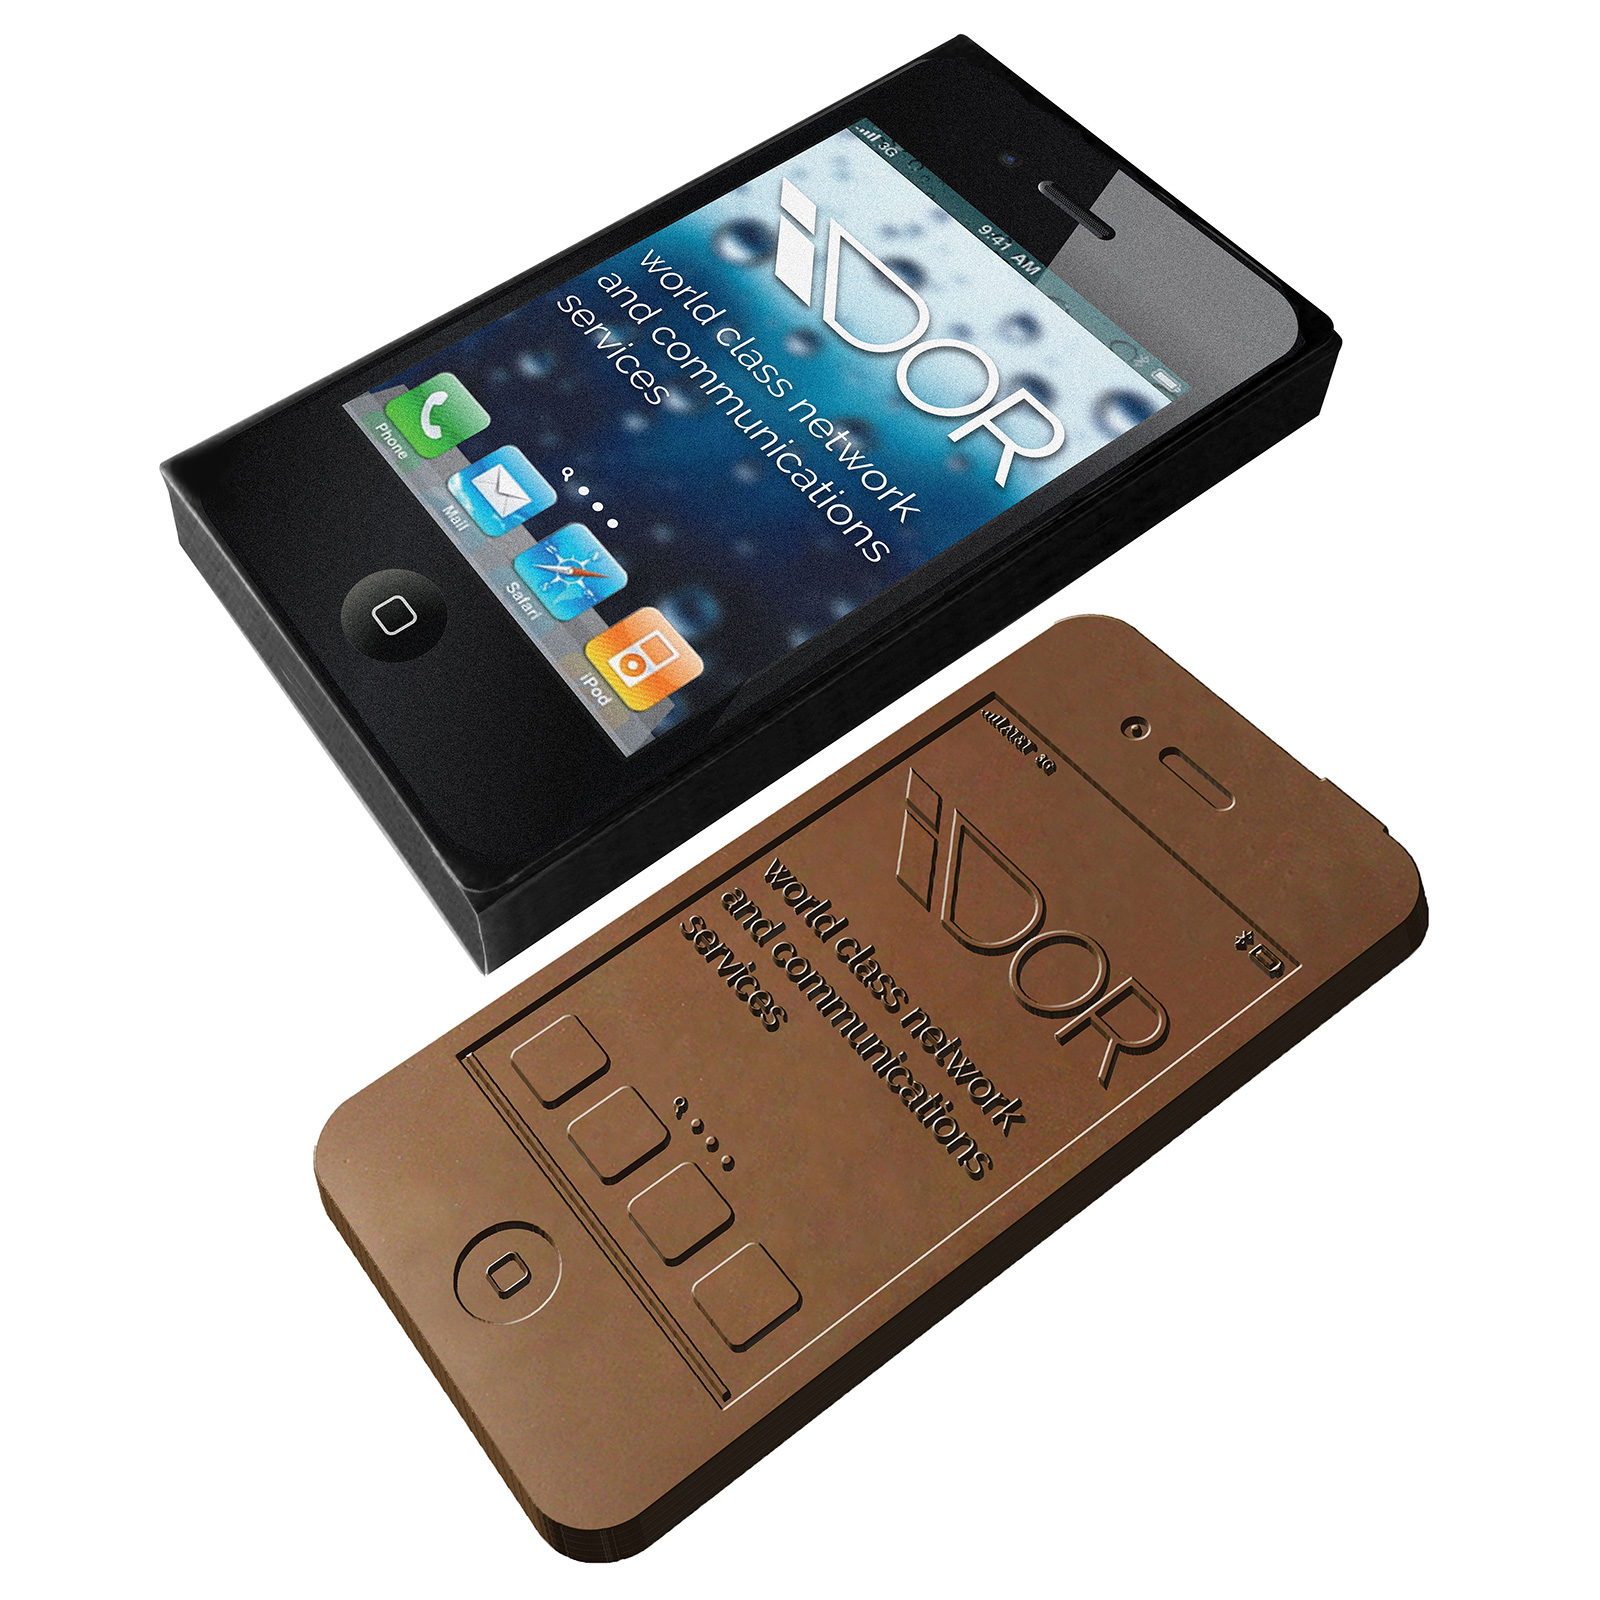 A smartphone made of chocolate, packaged in a box that is printed in full color - Falkland